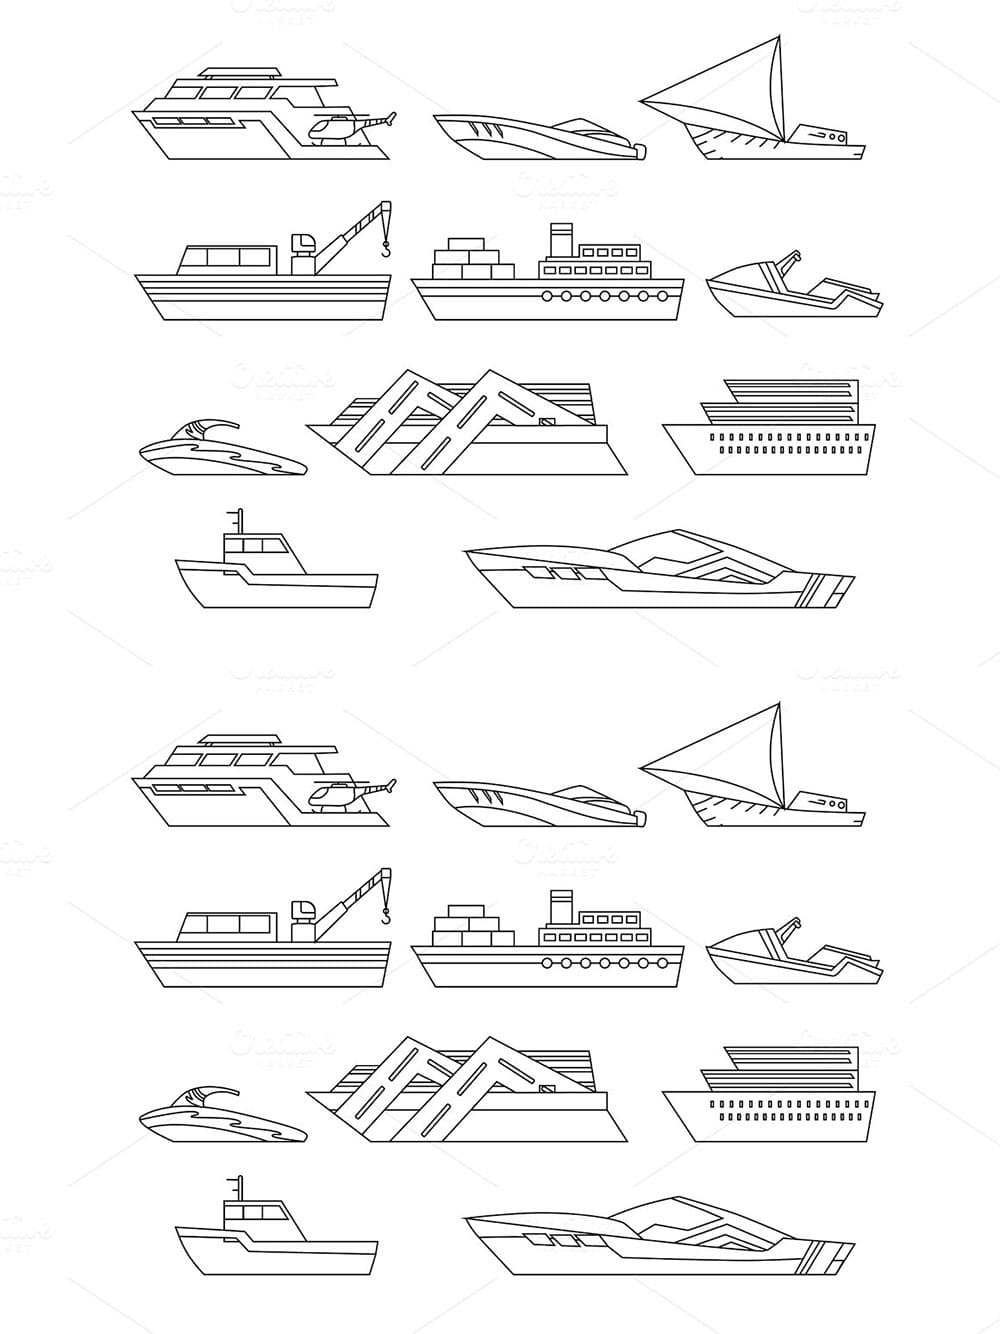 Ships at sea shipping boats ocean, picture for pinterest.